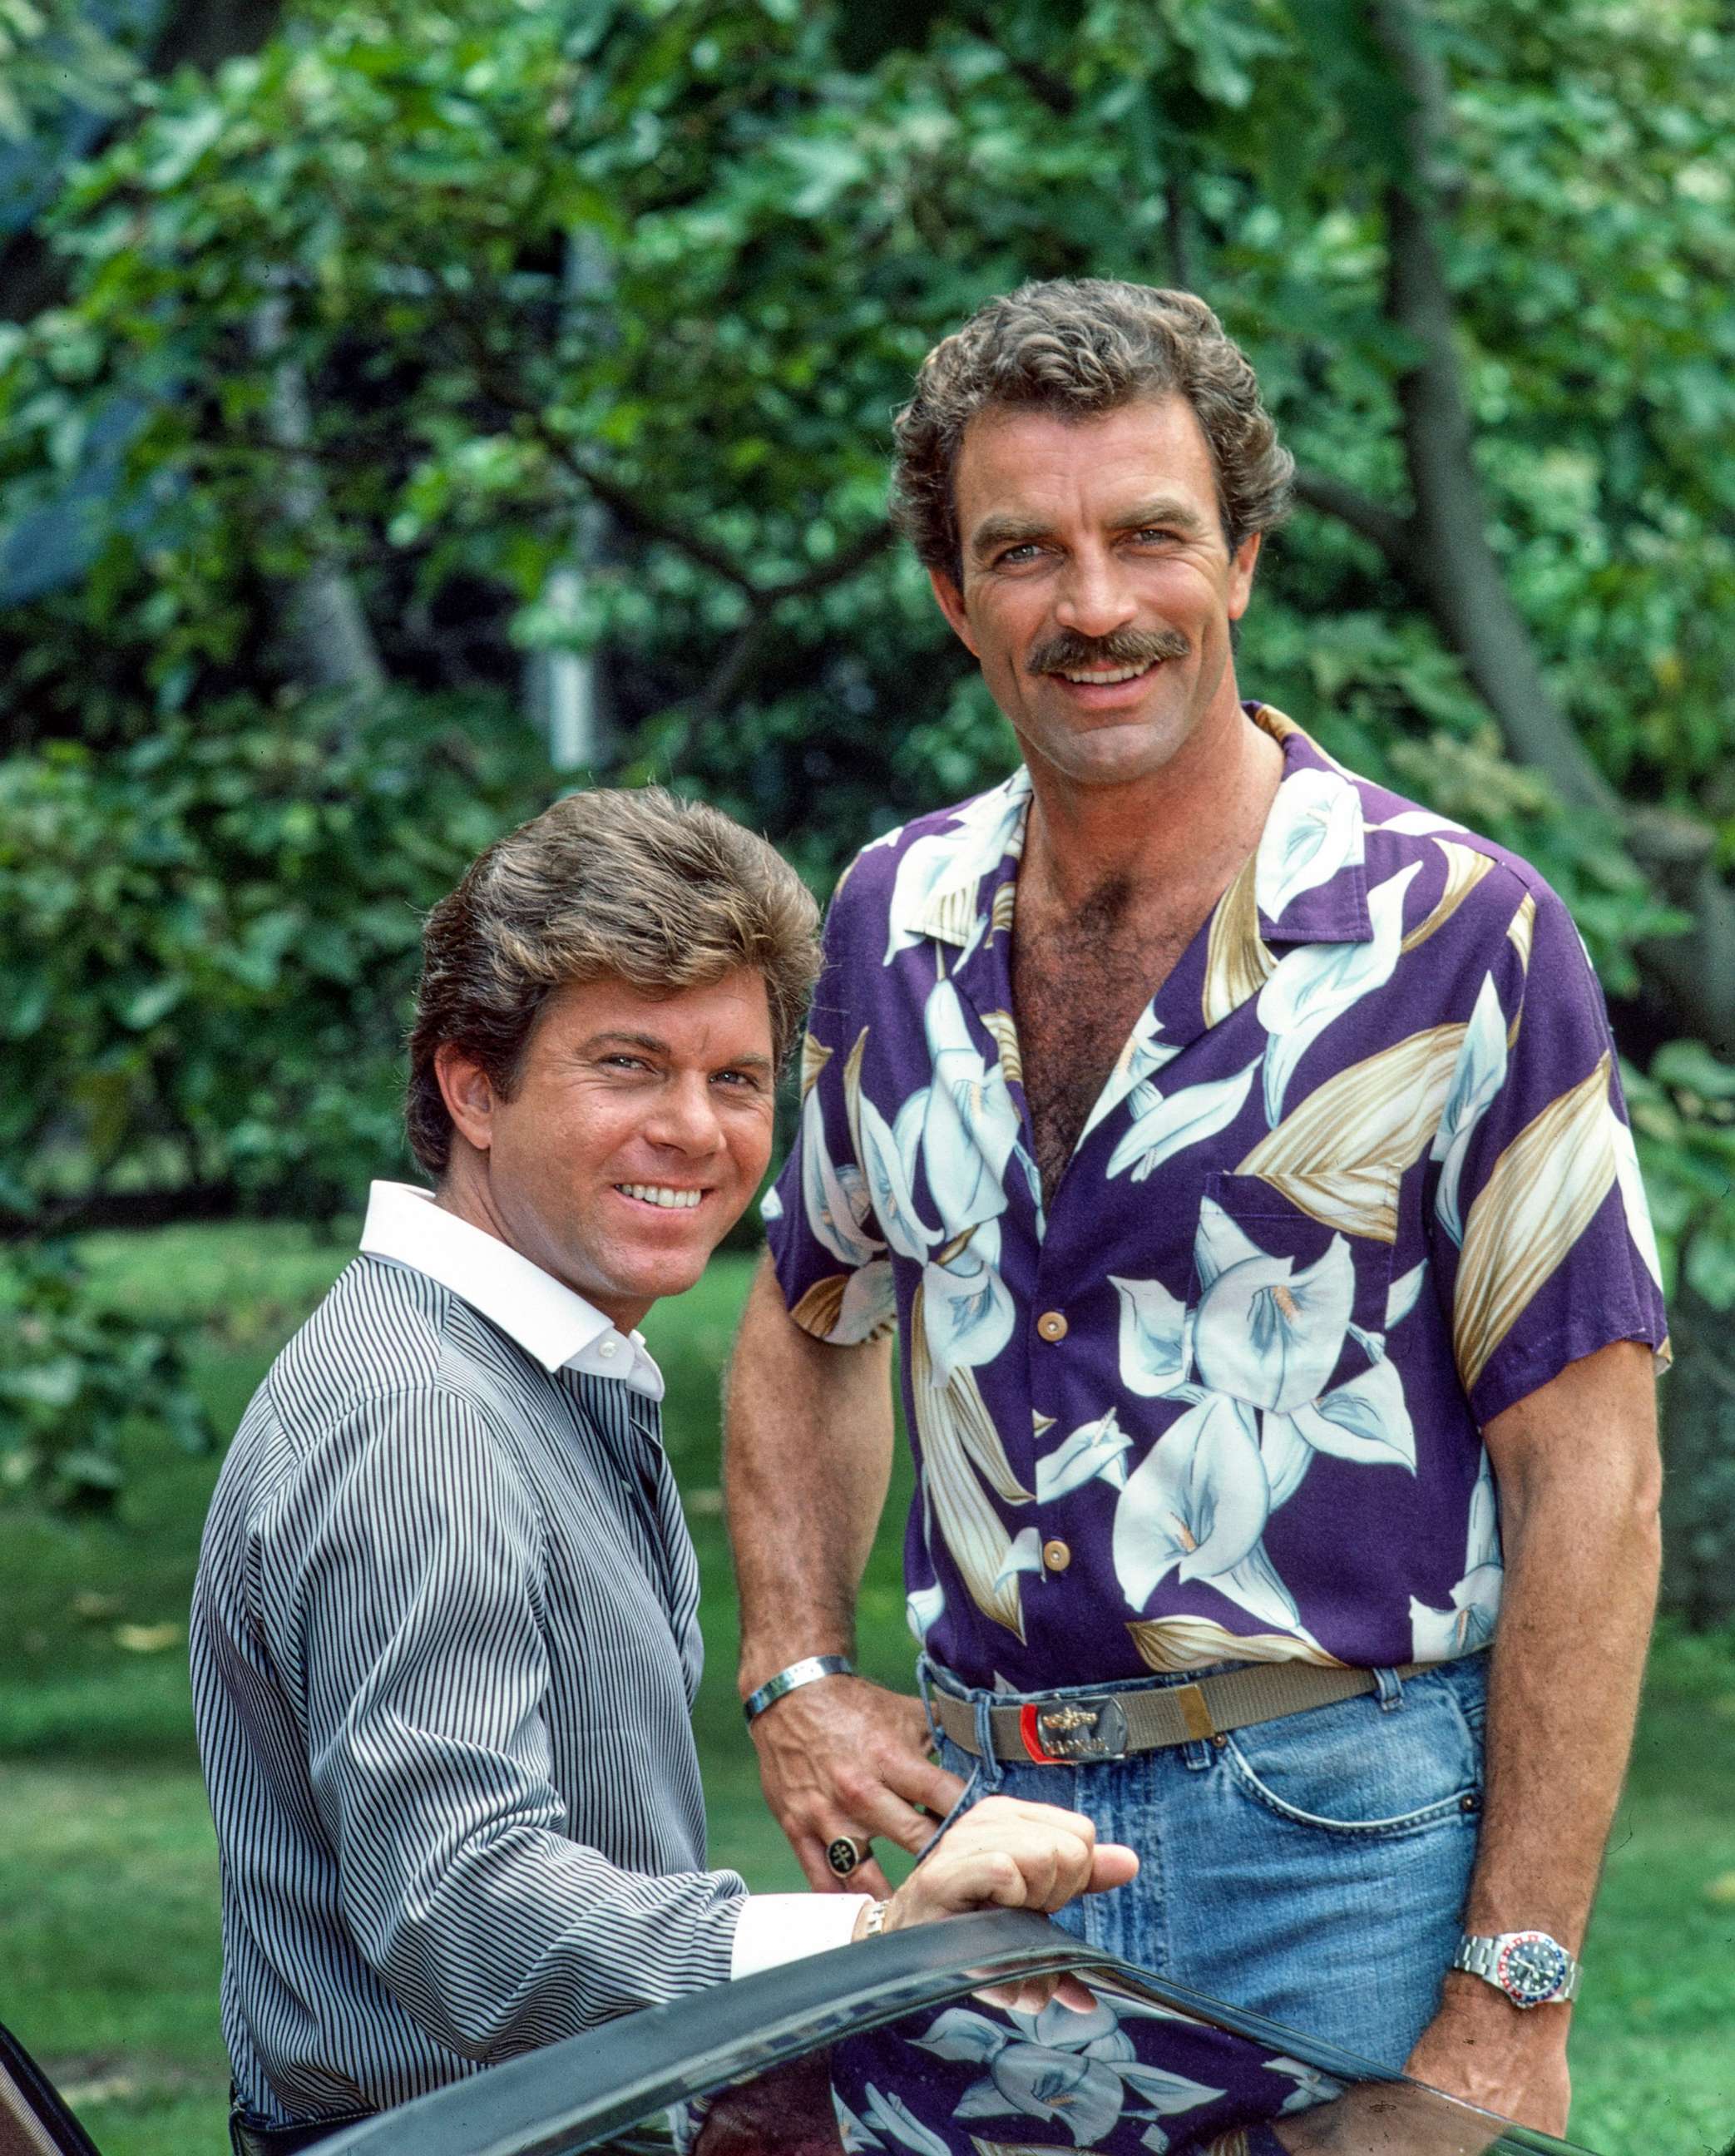 PHOTO: Larry Manetti, as Orville 'Rick' Wright, and Tom Selleck, as Magnum, in the CBS television series, "Magnum, P.I." in Honolulu, Hawaii, circa 1986.